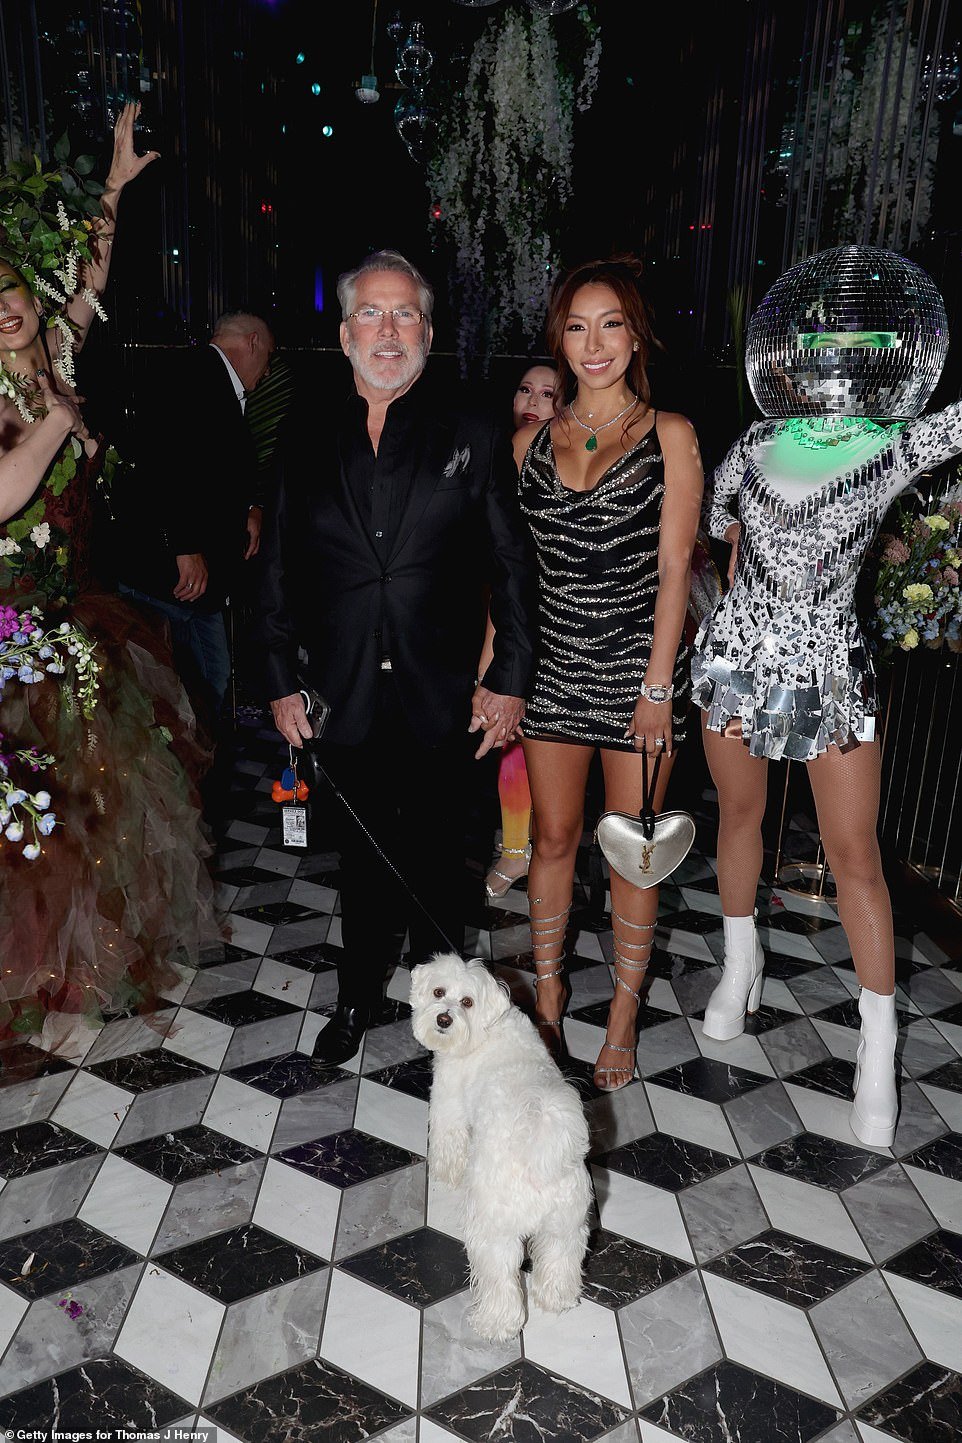 Thomas and Evelin make their grand entrance with their dog Tito